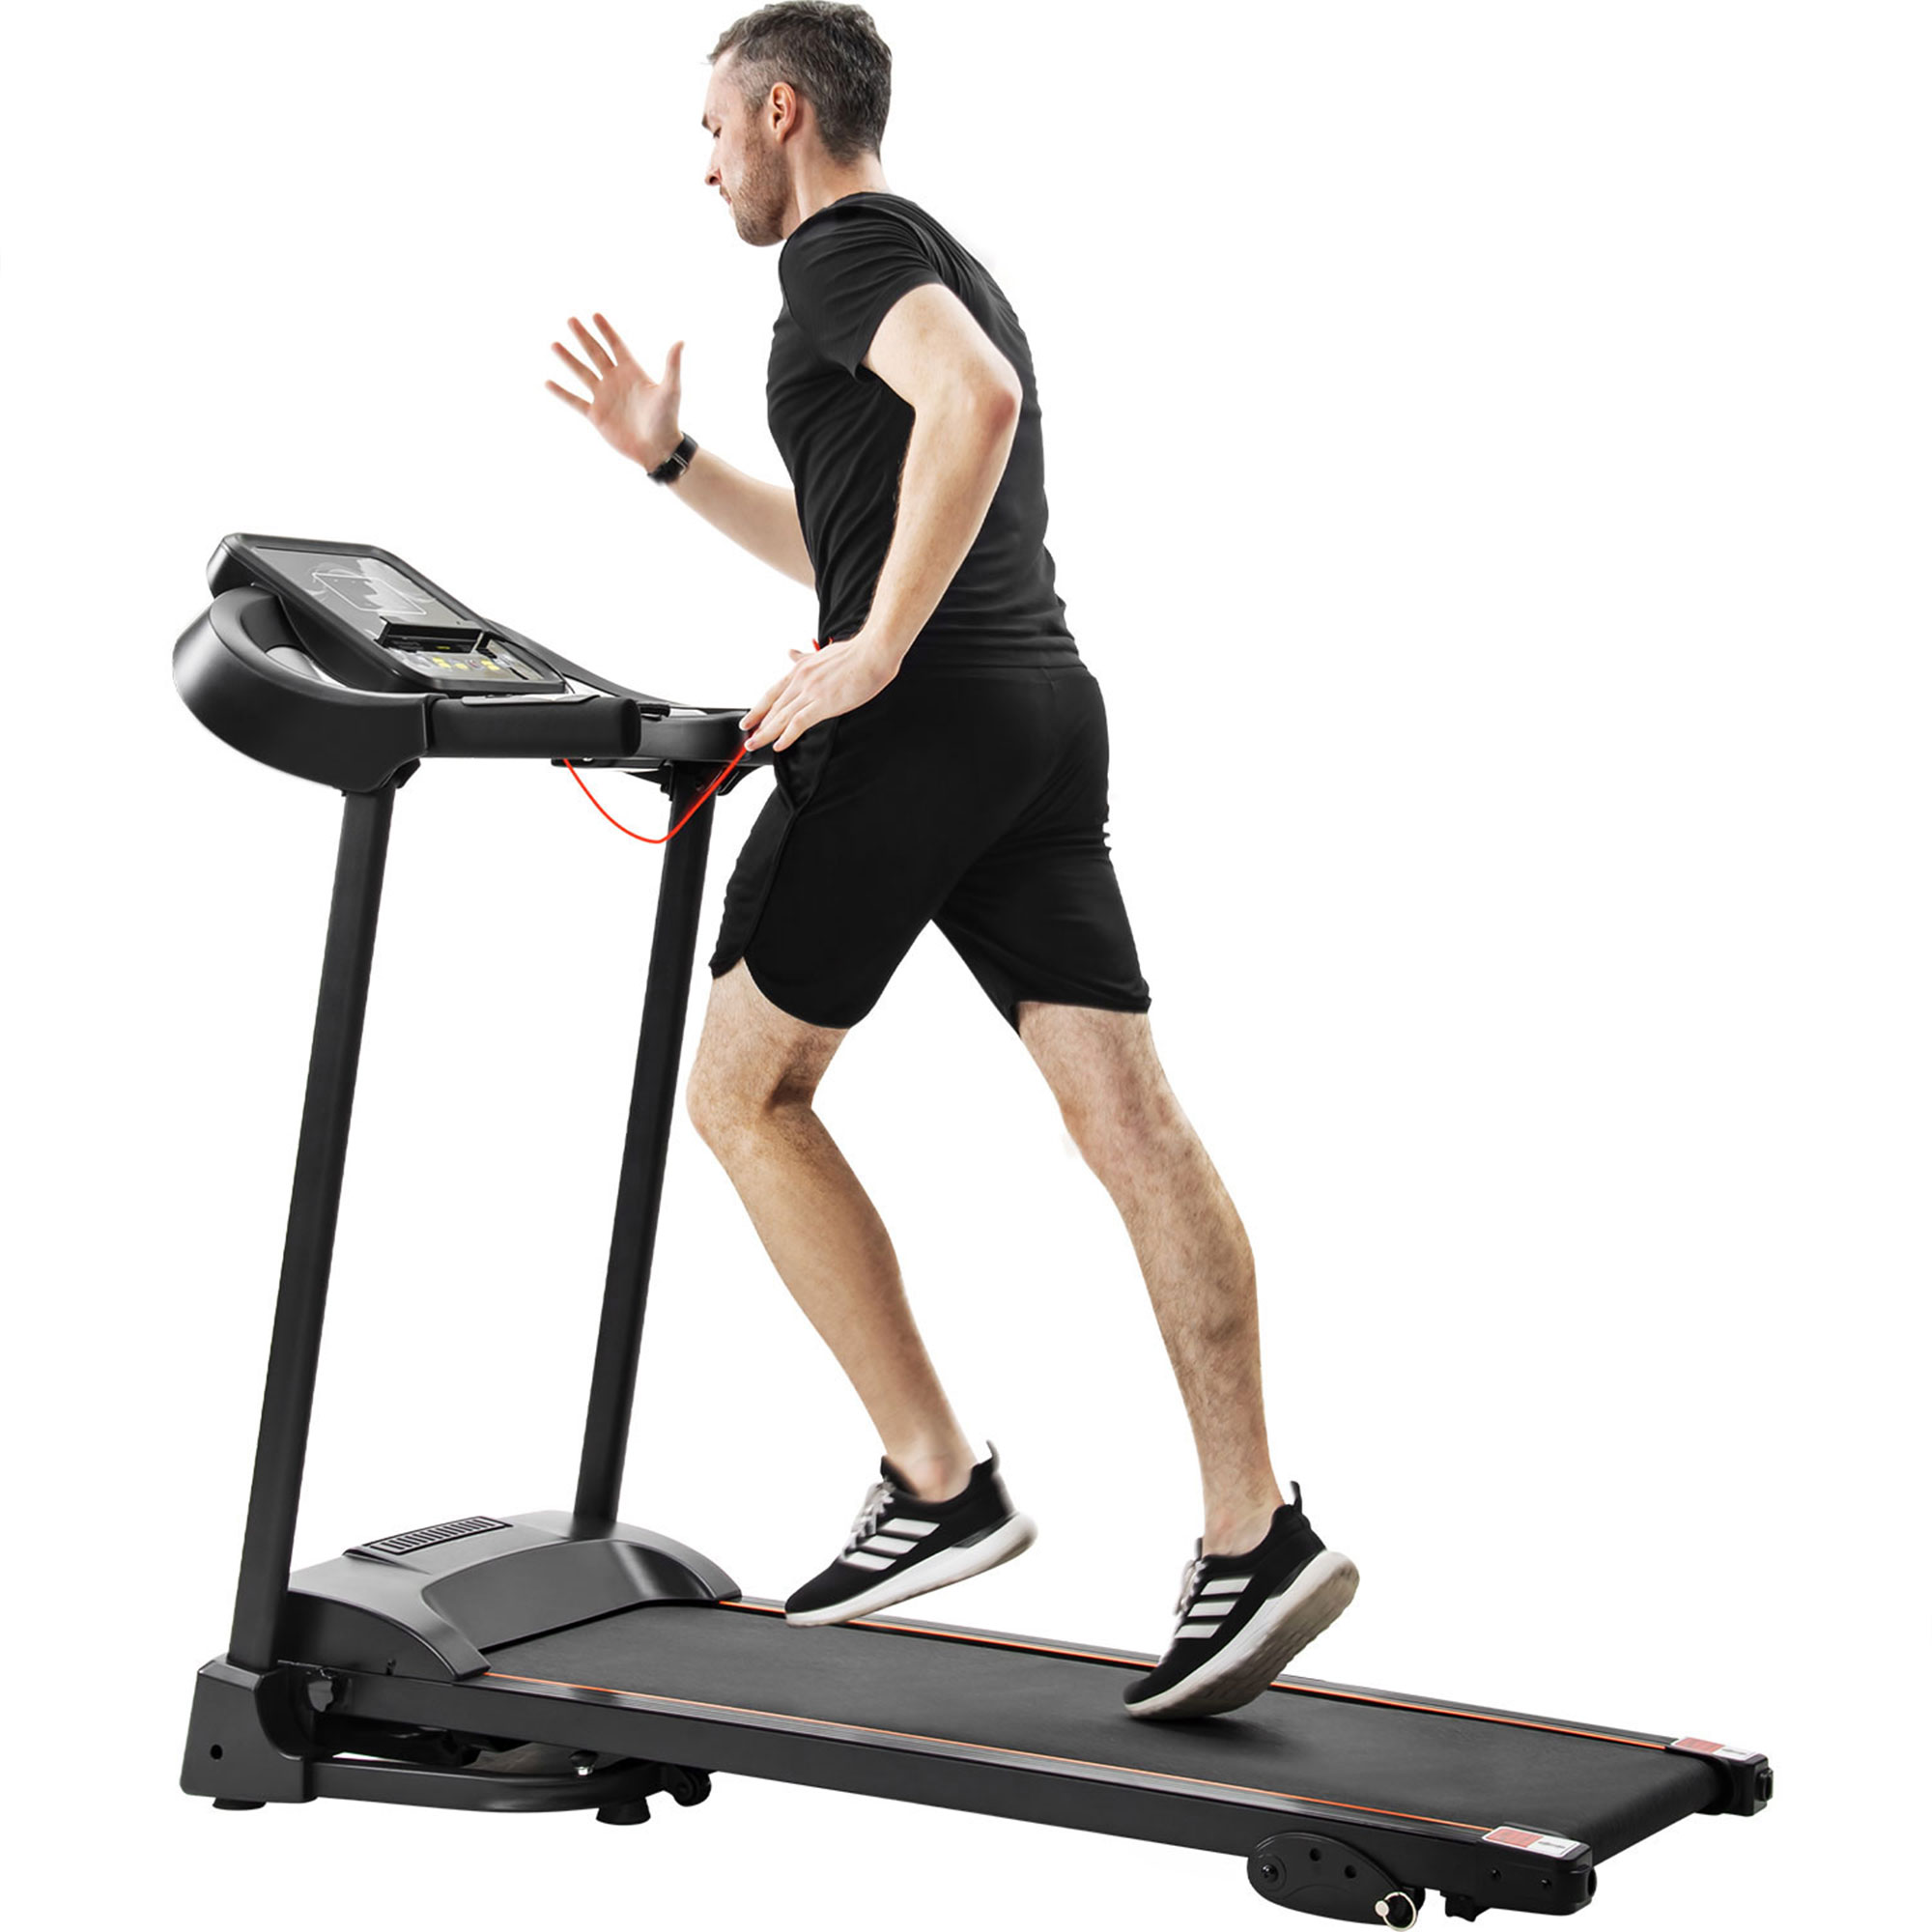 Compact Easy Folding Treadmill Motorized Running Jogging Machine with Audio Speakers and Incline Adjuster-Boyel Living